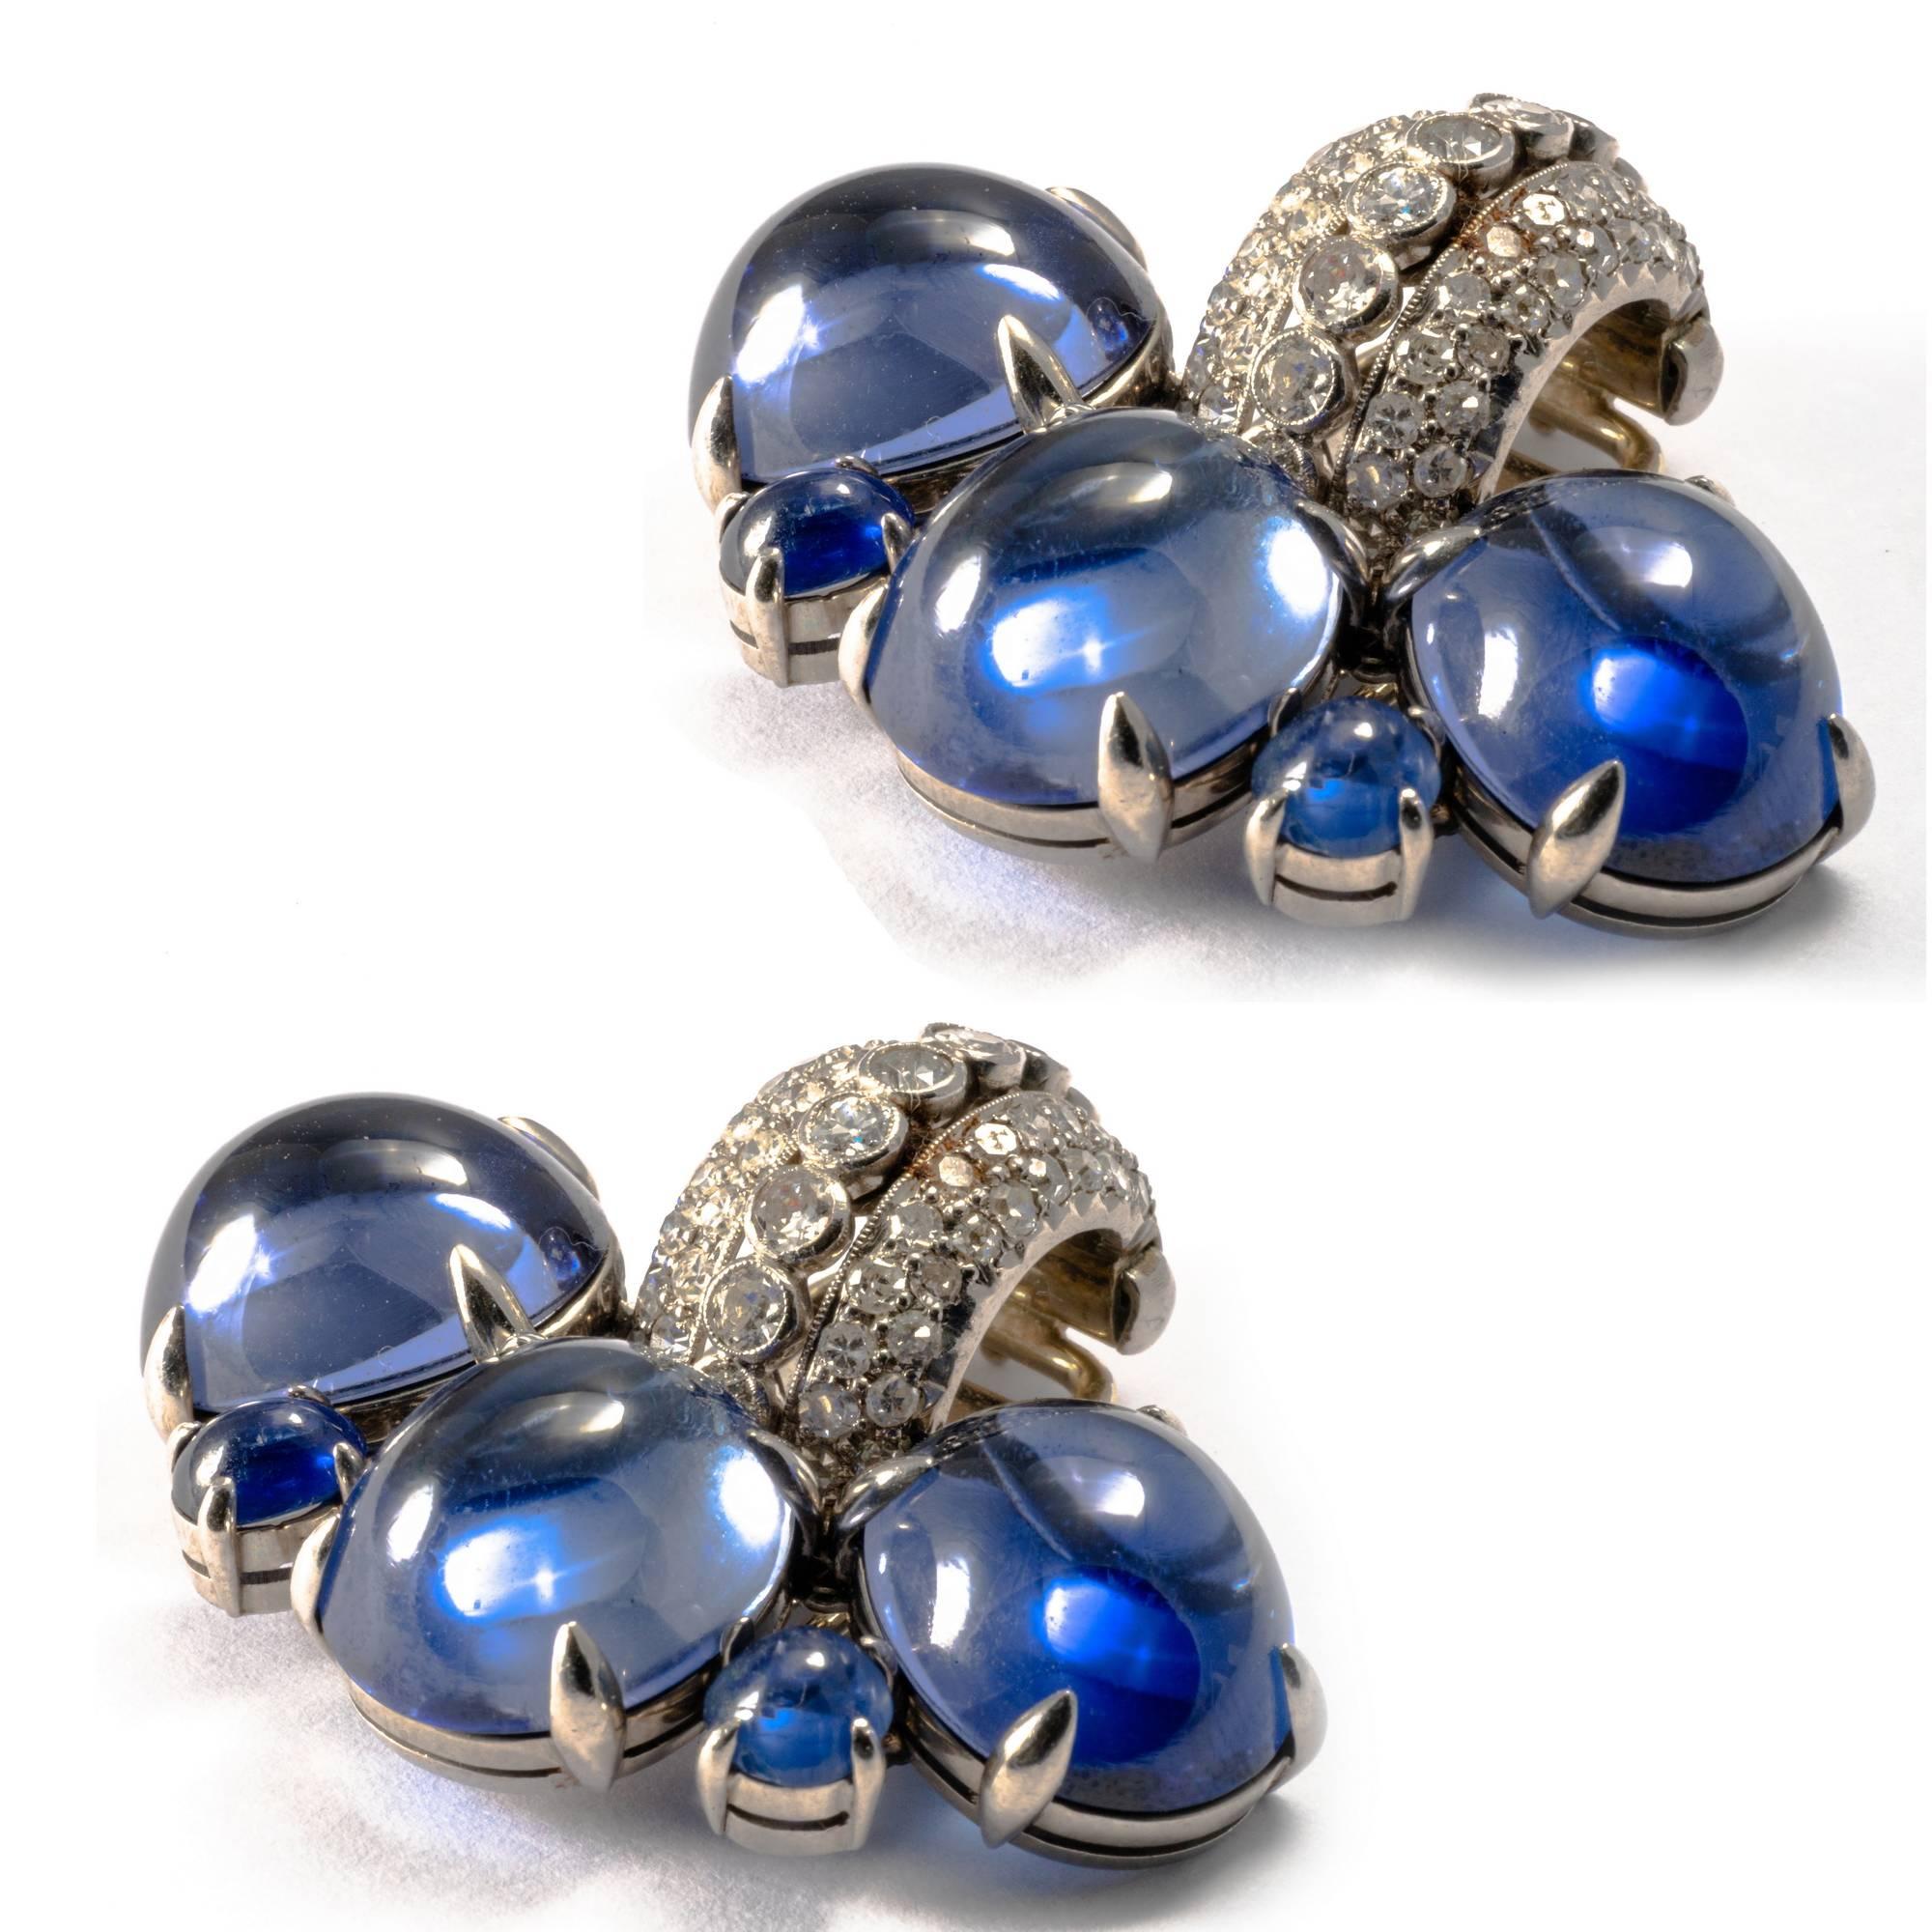 1980-1990 Cabochon Diamond and Sapphire 18K Gold Set Earrings and Pin Brooch For Sale 9